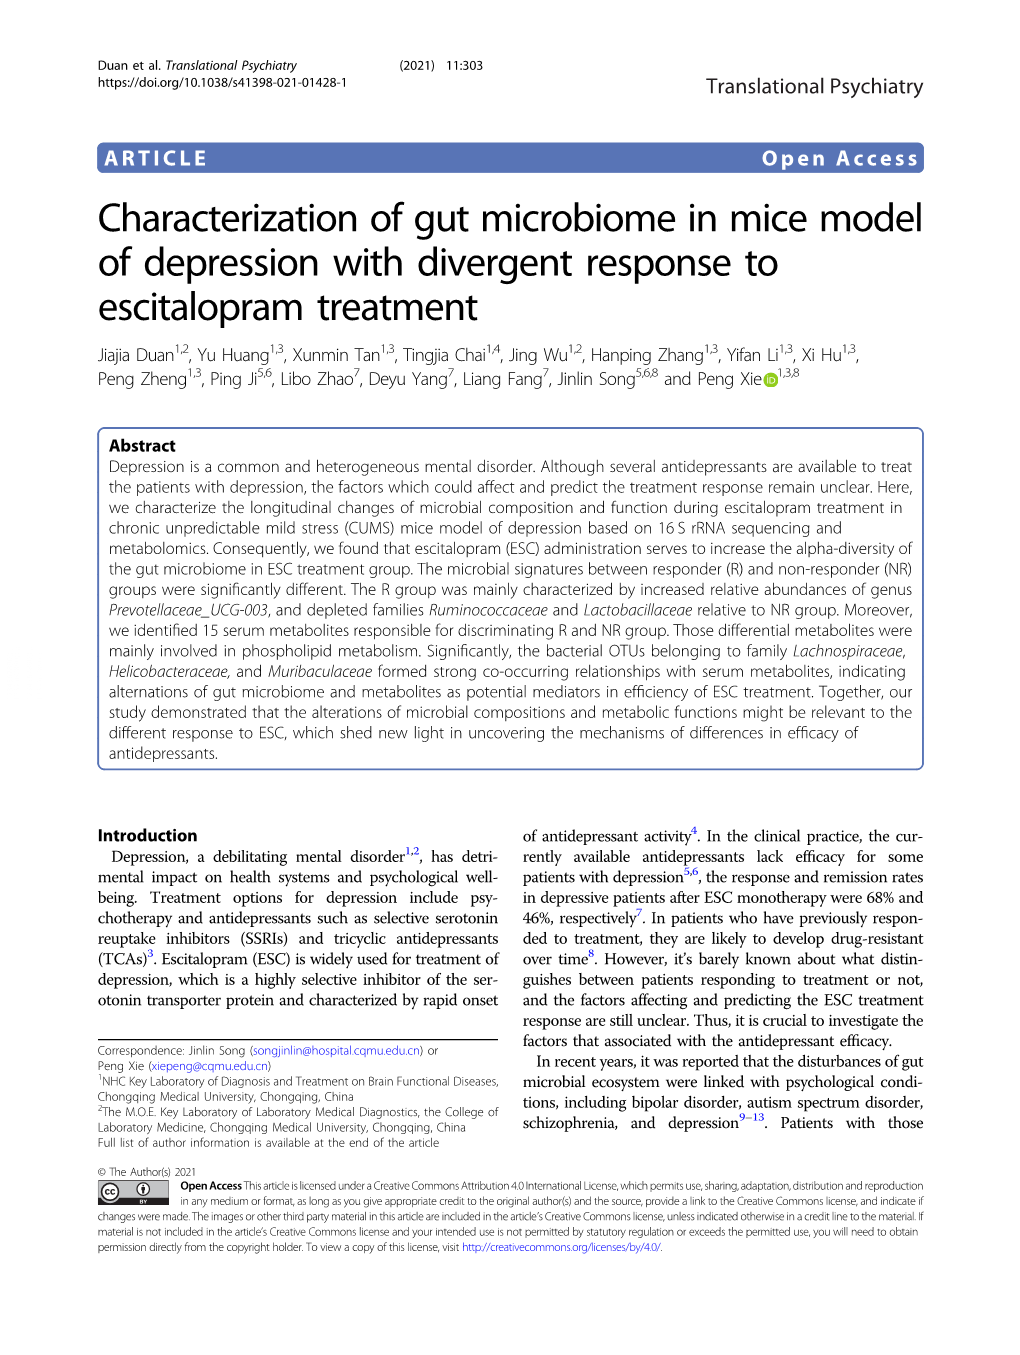 Characterization of Gut Microbiome in Mice Model of Depression